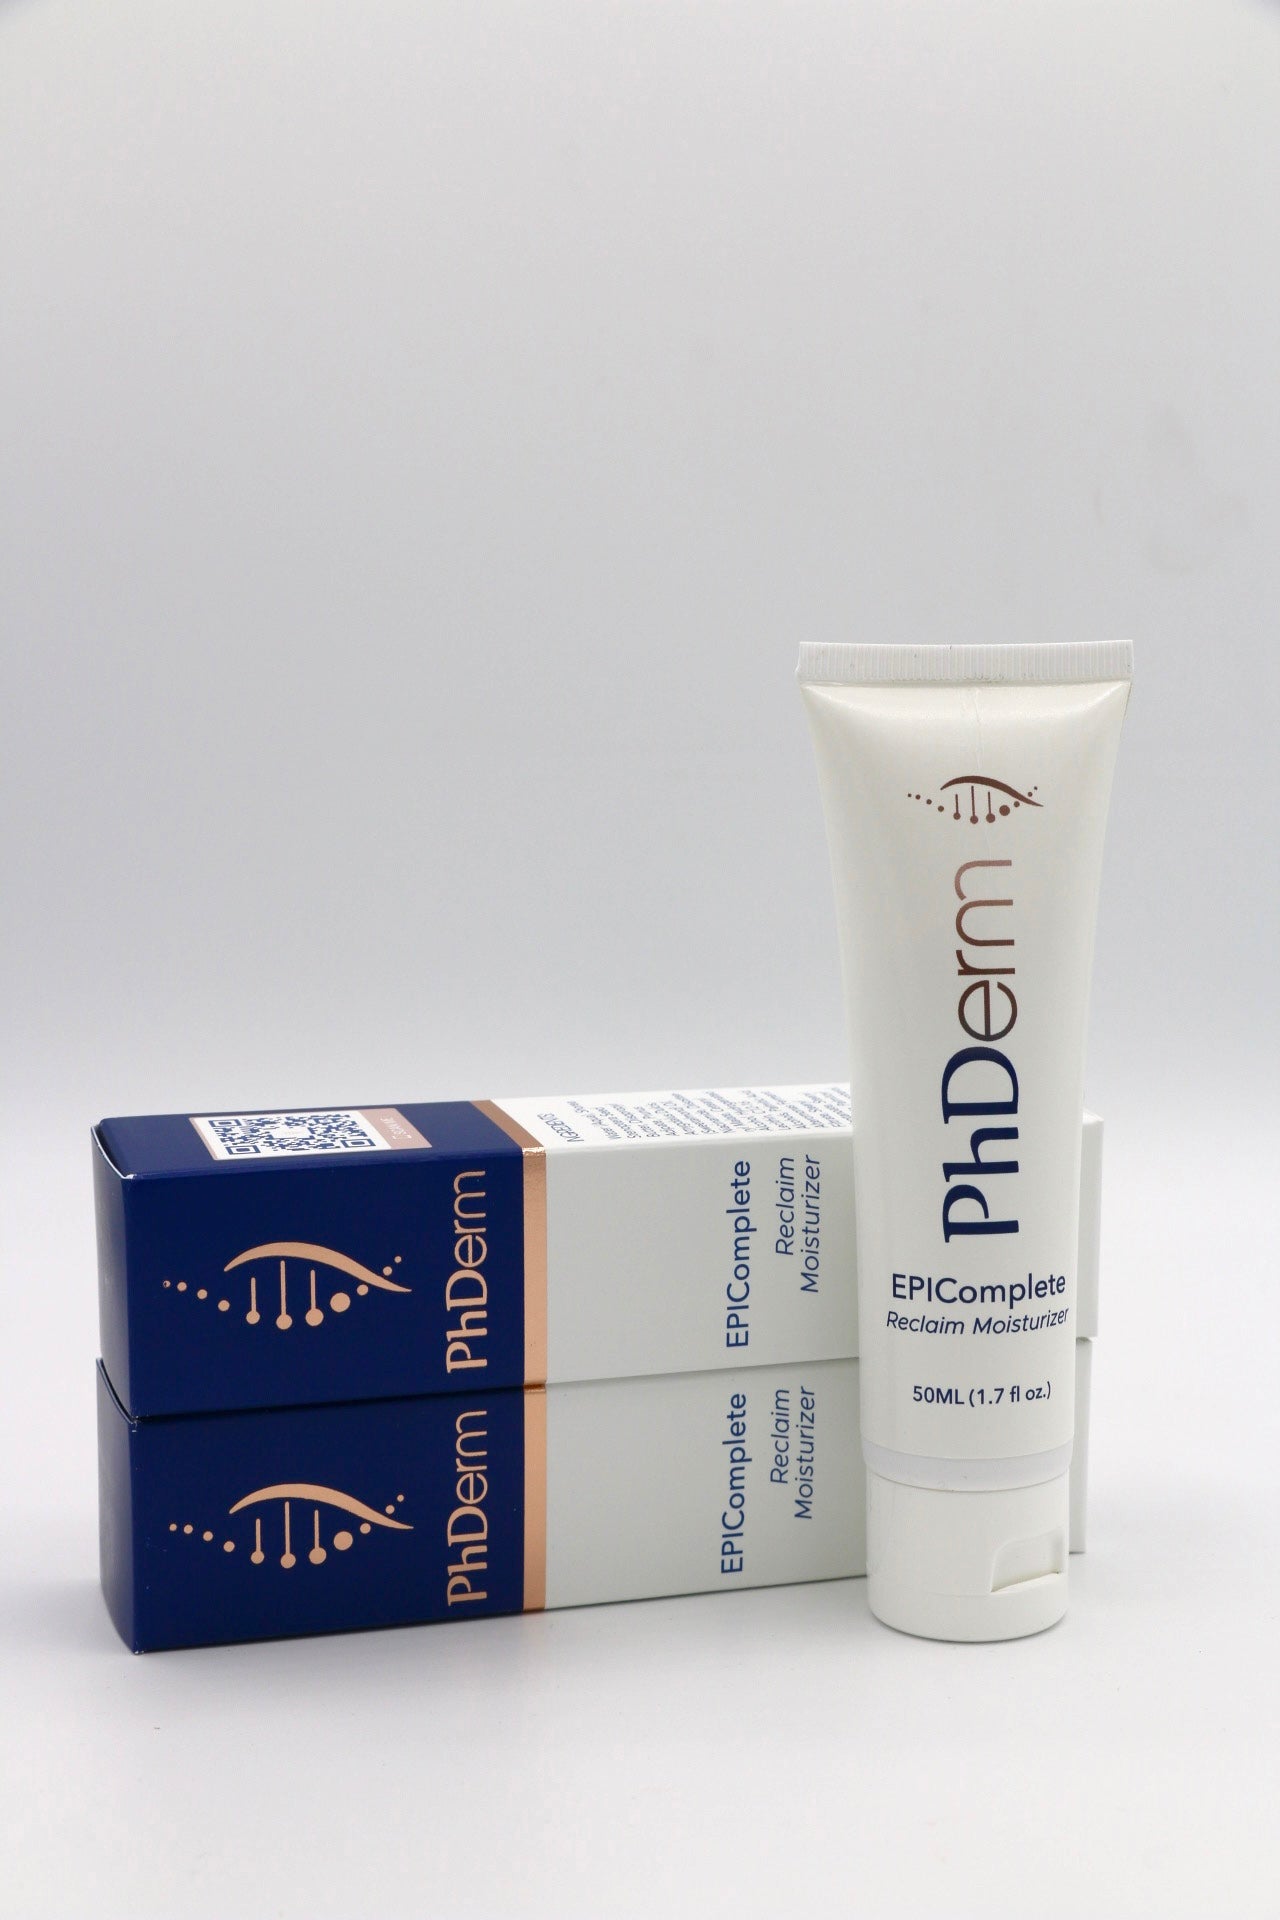 EPIComplete Reclaim Moisturizer - Home & Away Two Pack